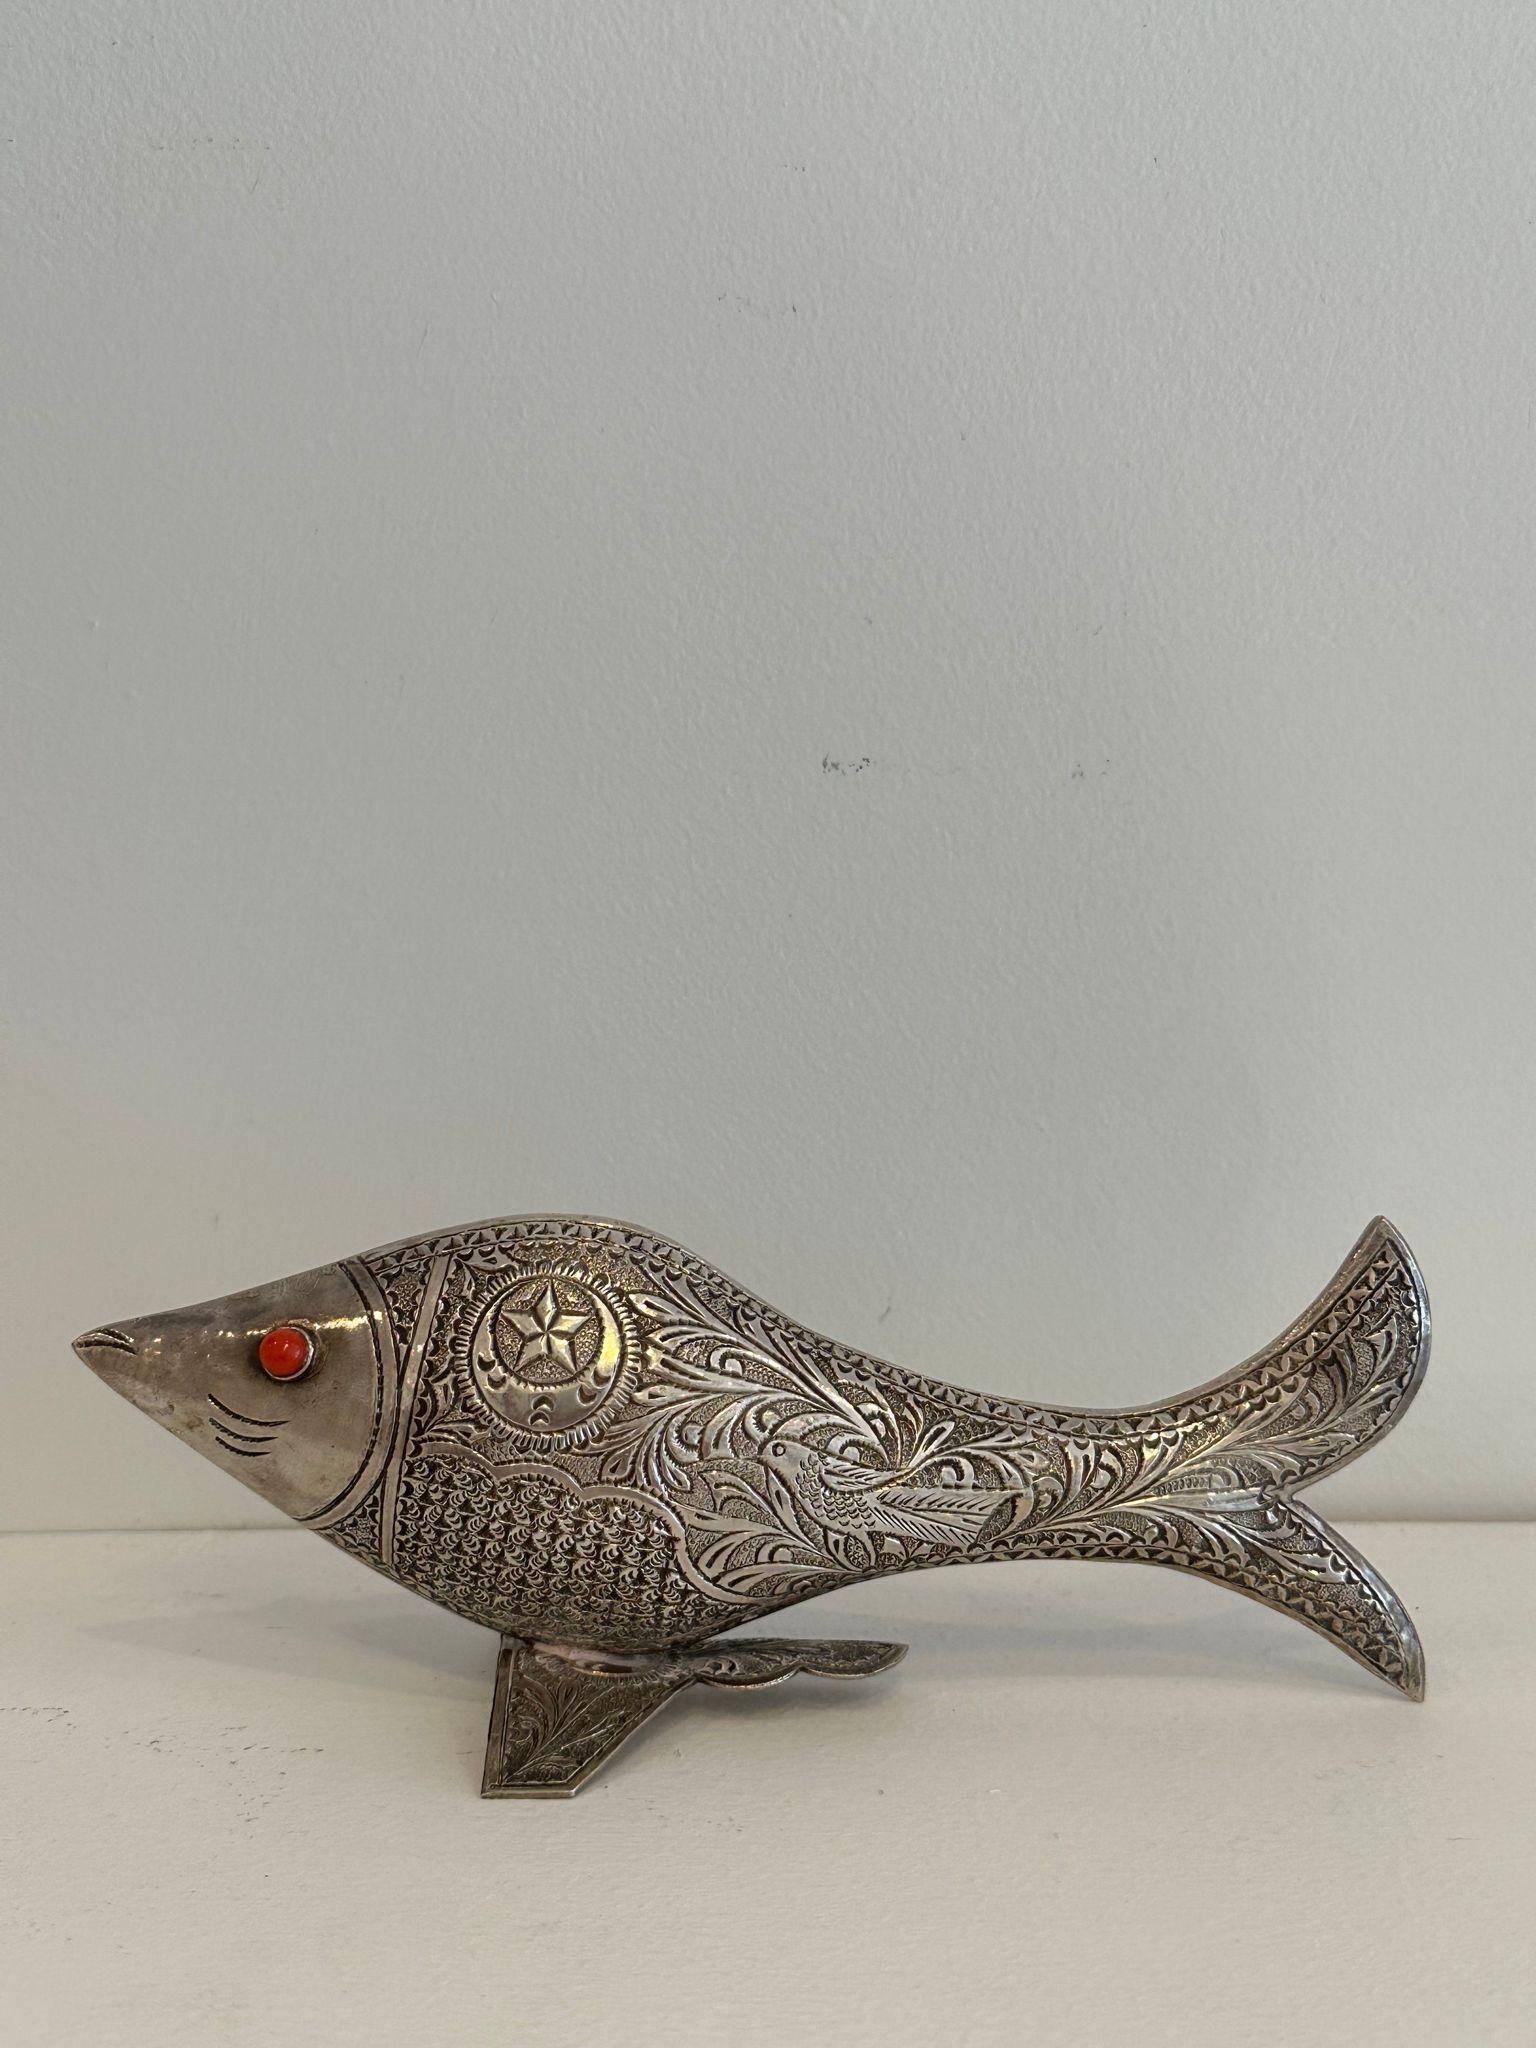 A rare, handmade standing sculptural amulet in the form of a fish. Unlike similar items that are mostly two-dimensional and are meant to be hanged only, this amulet is a standing sculpture in the round. The fish's eyes are made of coral, a gem stone